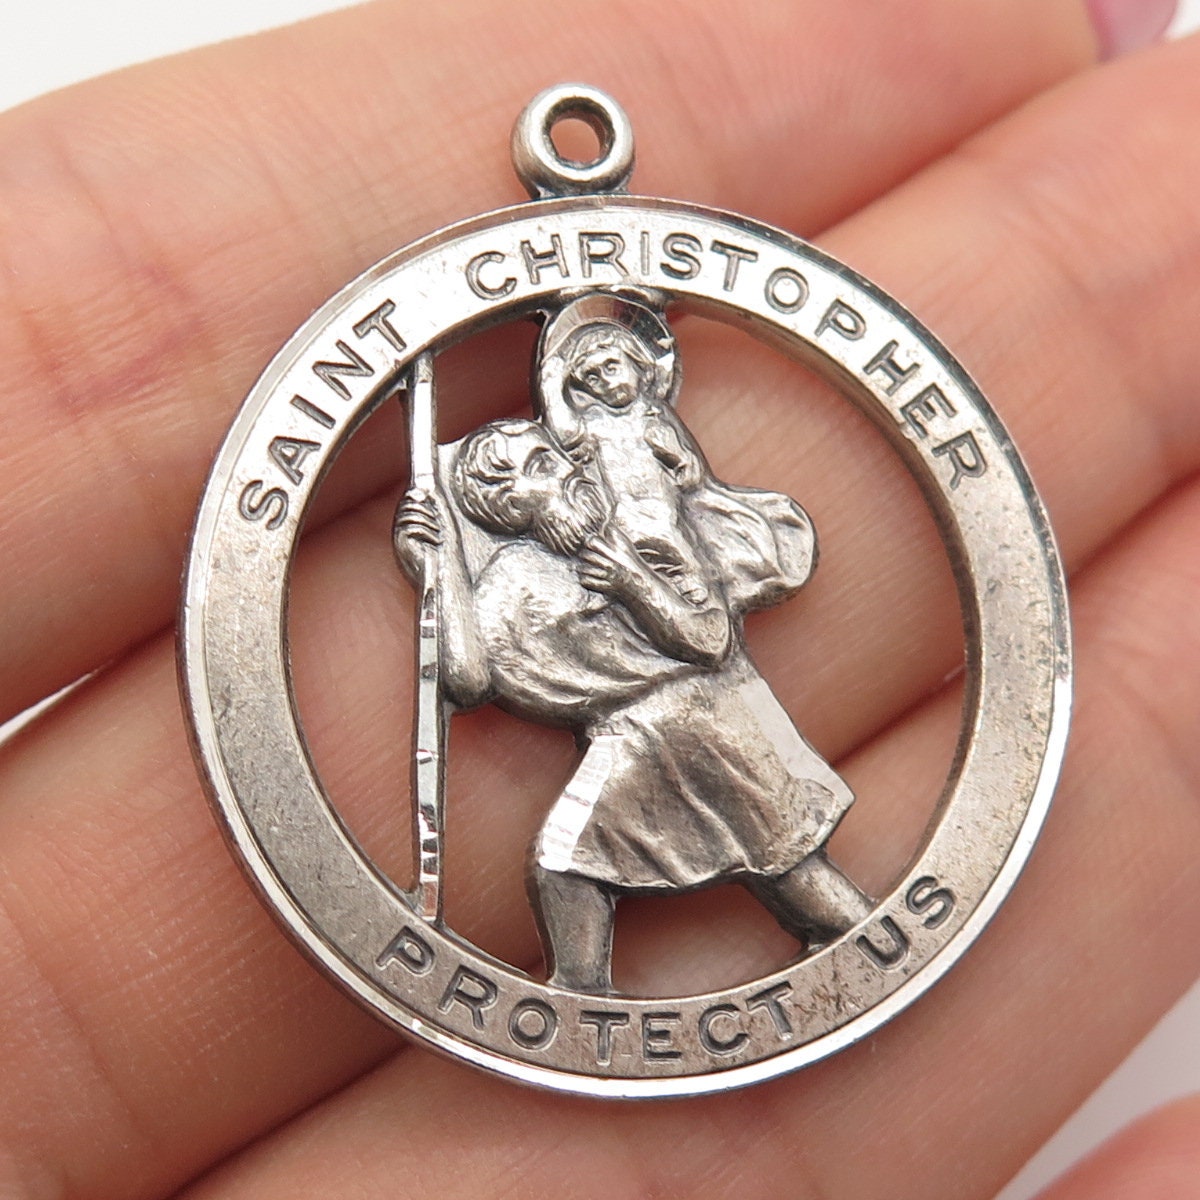 Blue Saint Christopher Protect Us Words On Round Quarter Size